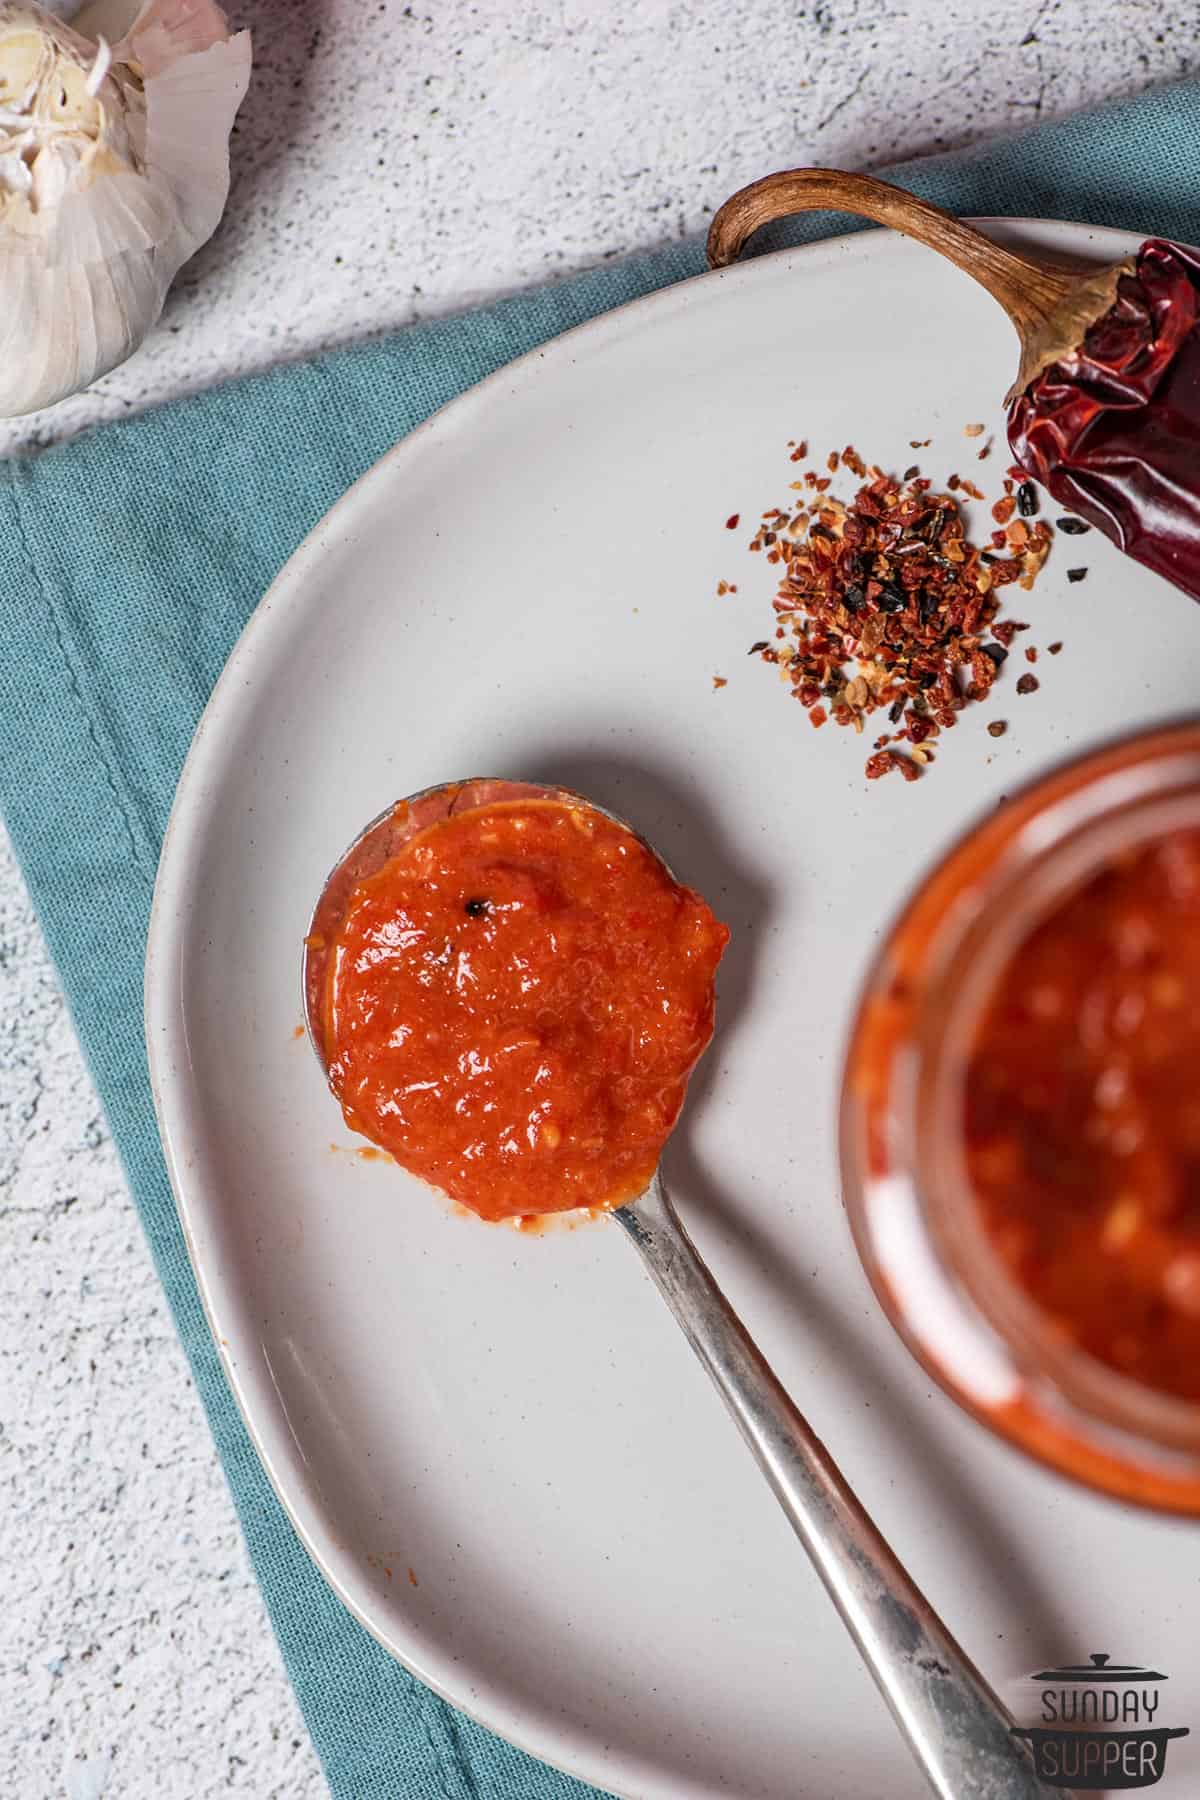 a spoon full of harissa sauce on a plate with extra red pepper flakes